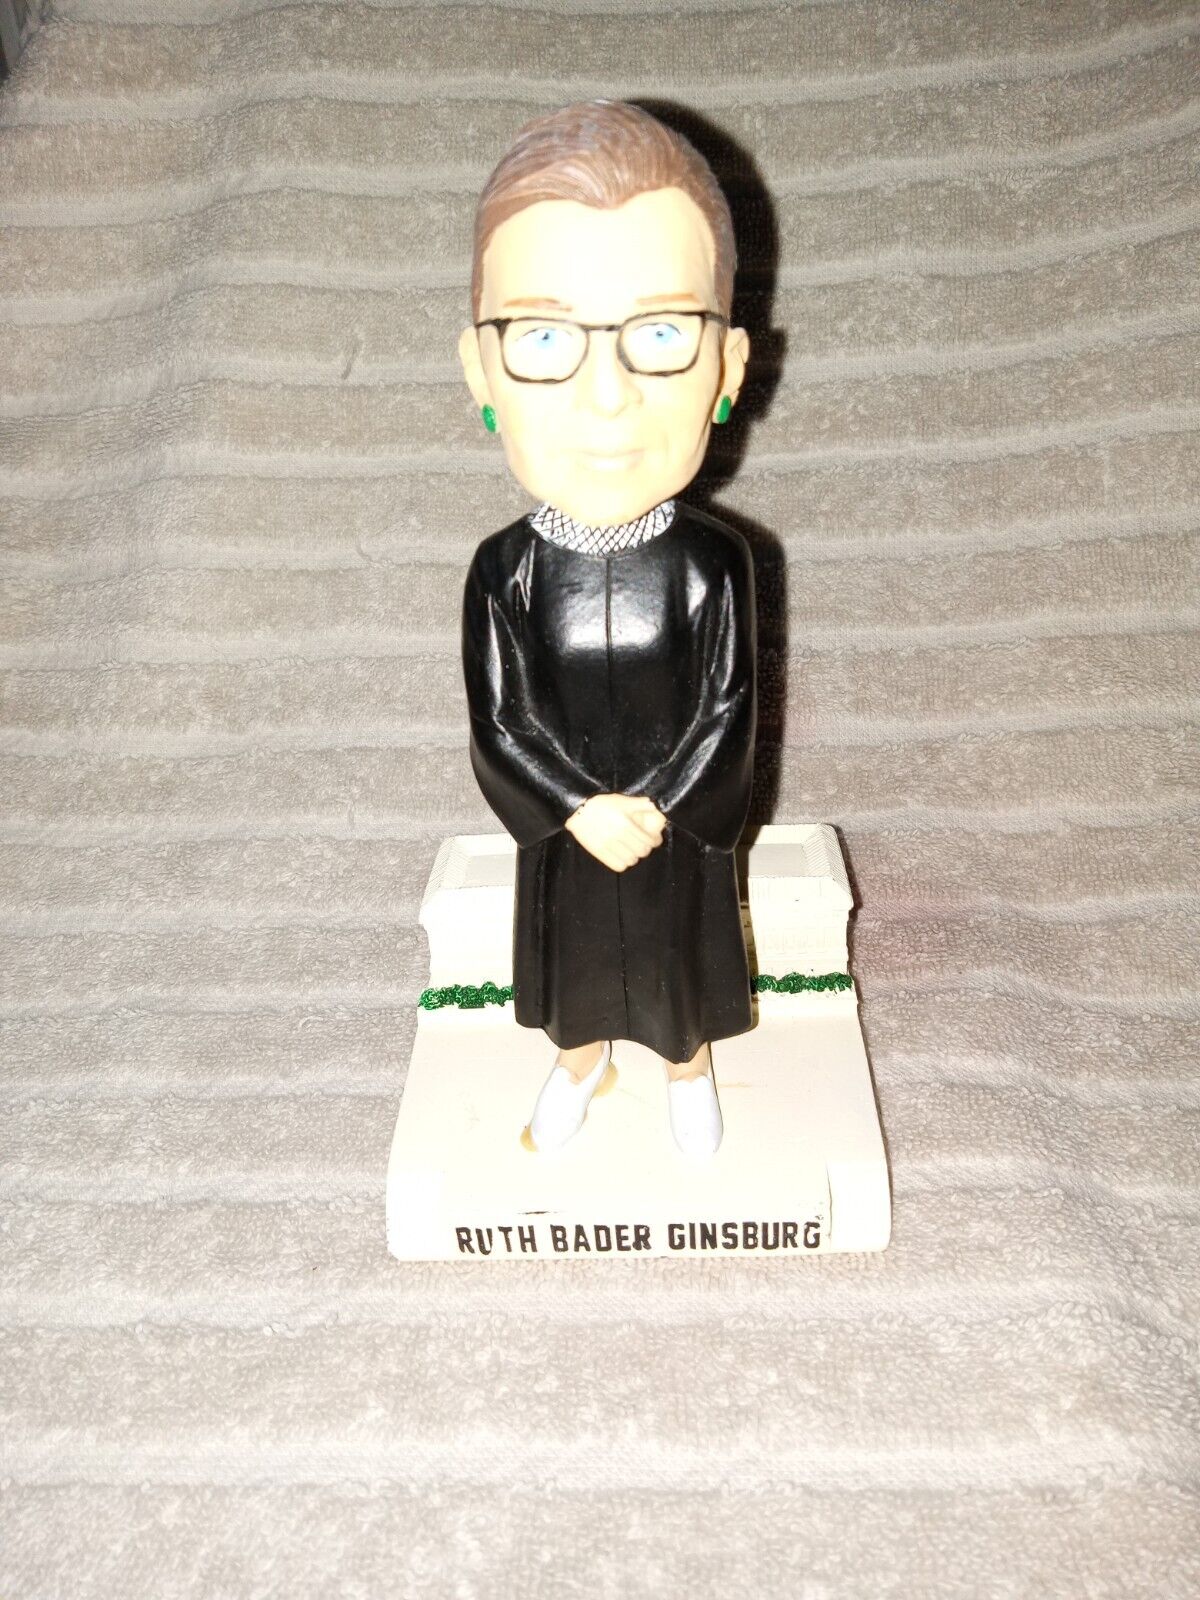 Limited Edition Ruth Bader Ginsburg Bobblehead Court Bobbles RARE Serious Face